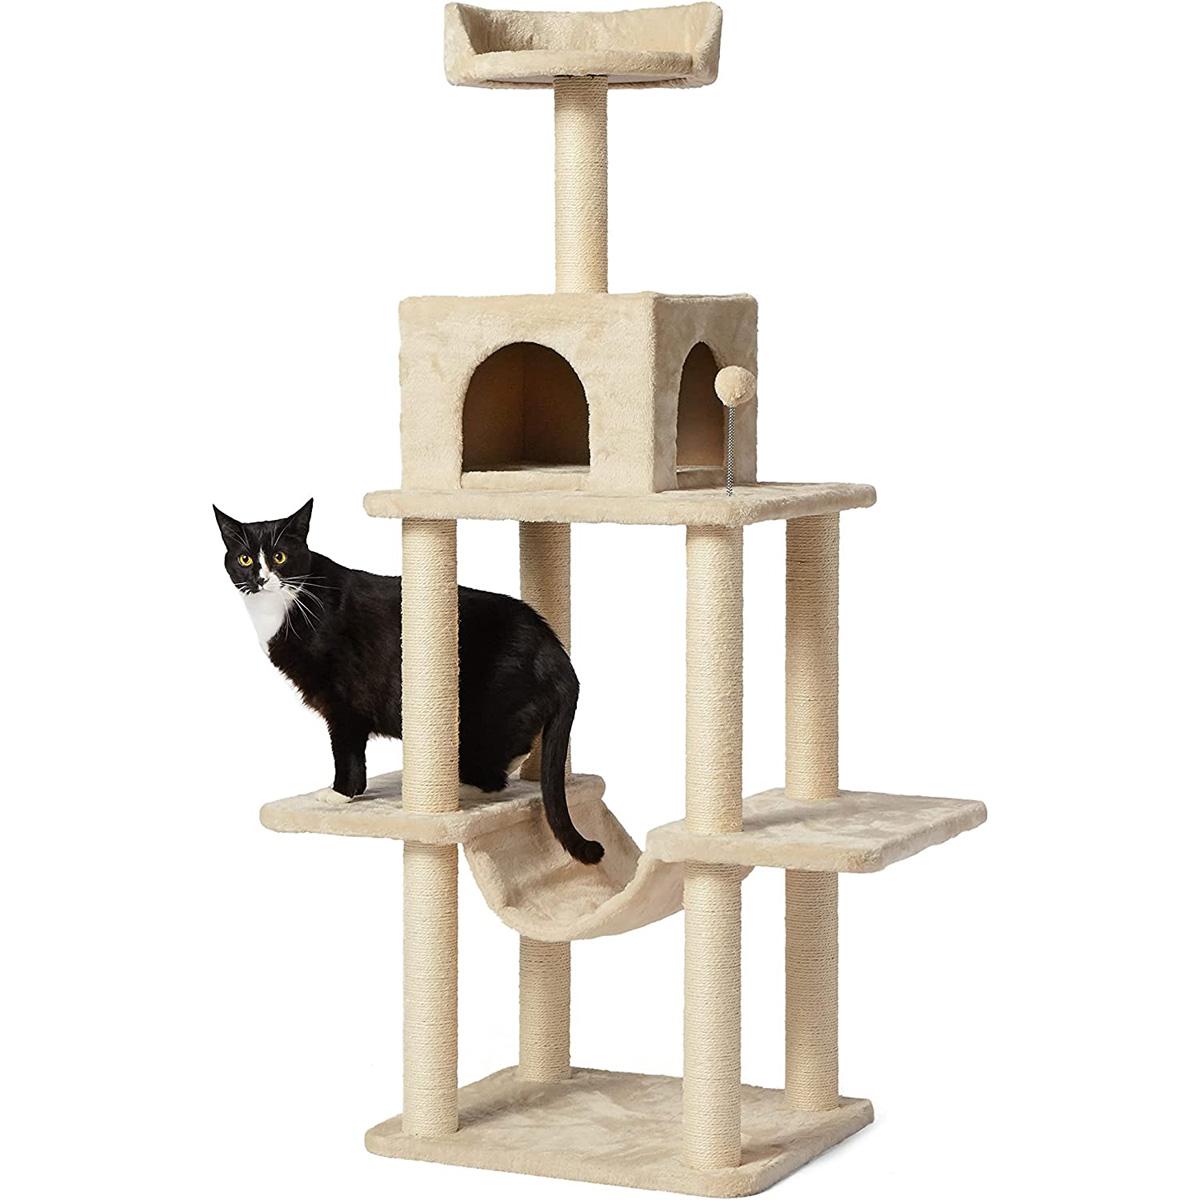 Amazon Basics Multi-Level Cat Tree with Scratching Posts for $46 Shipped